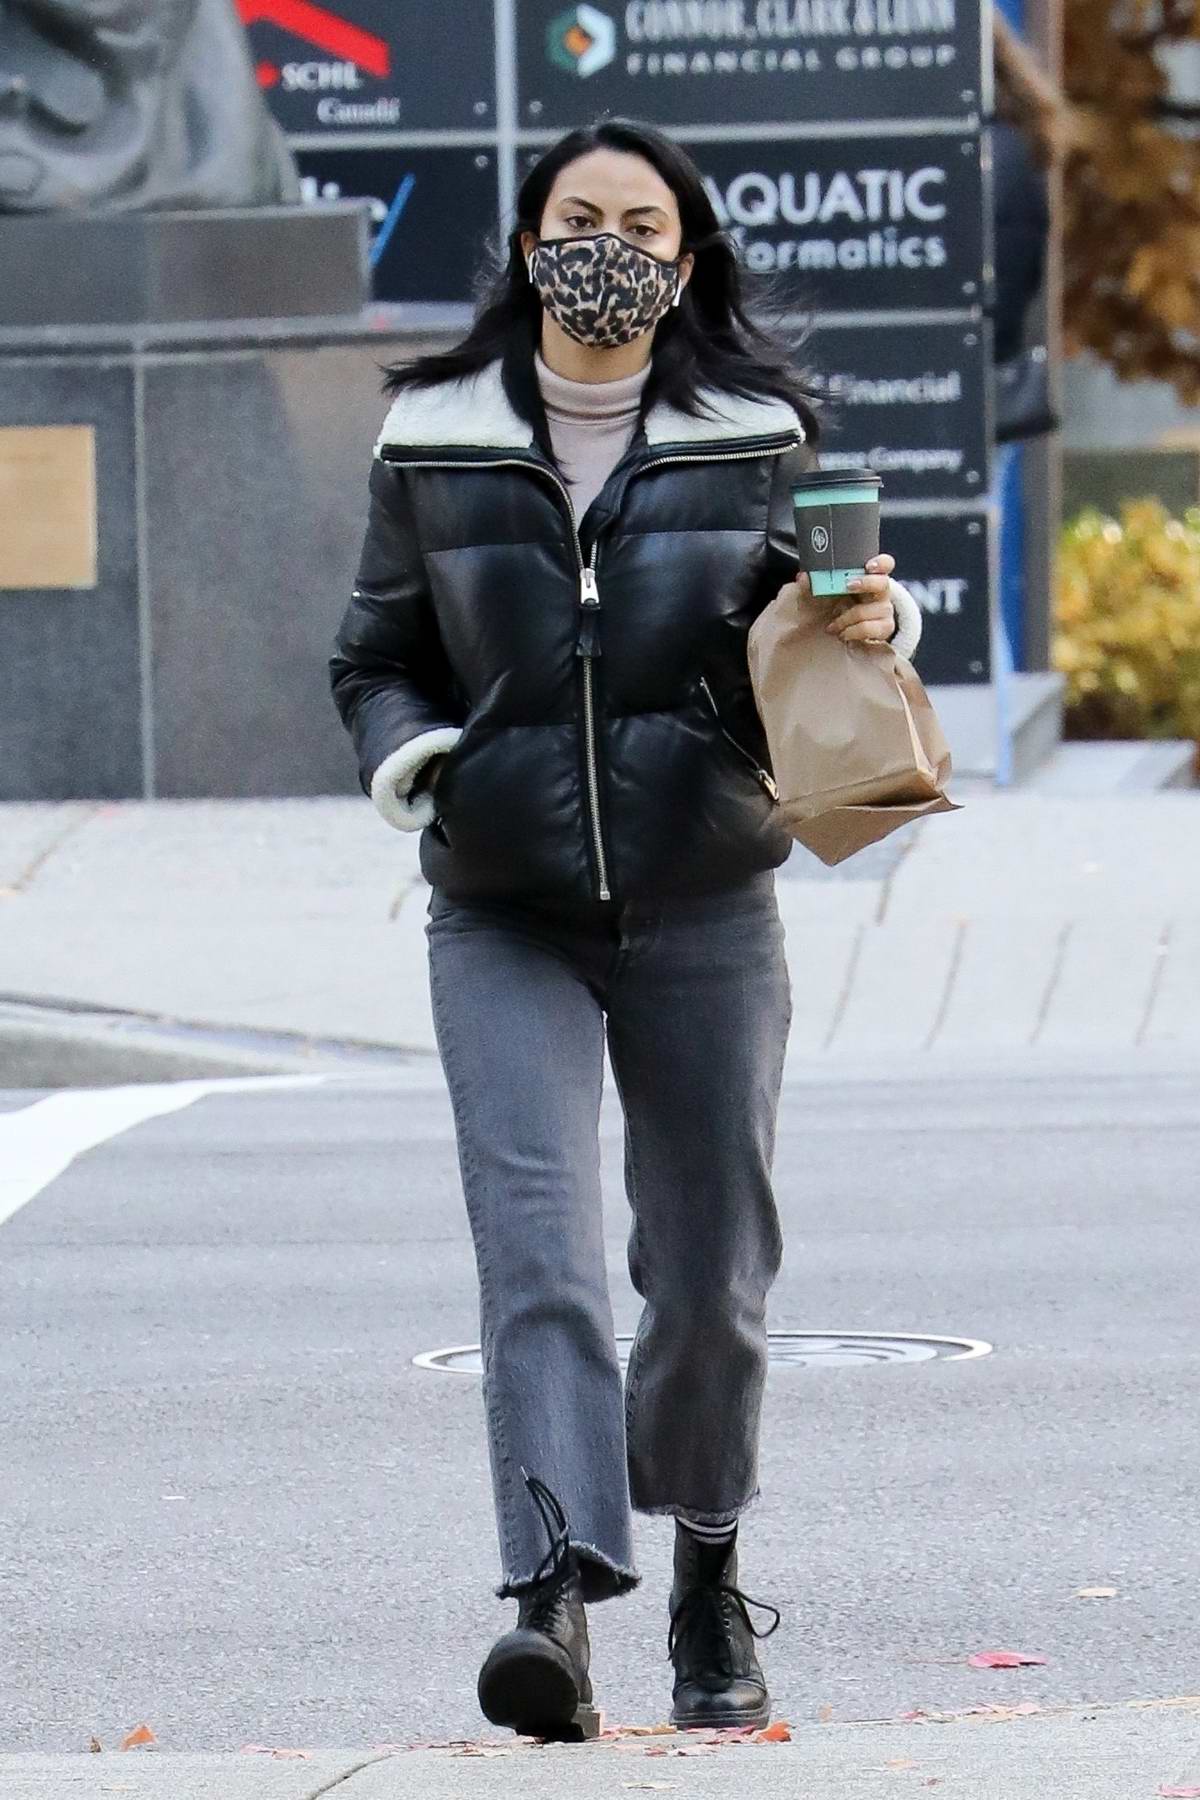 Camila Mendes in a chic denim outfit in Vancouver